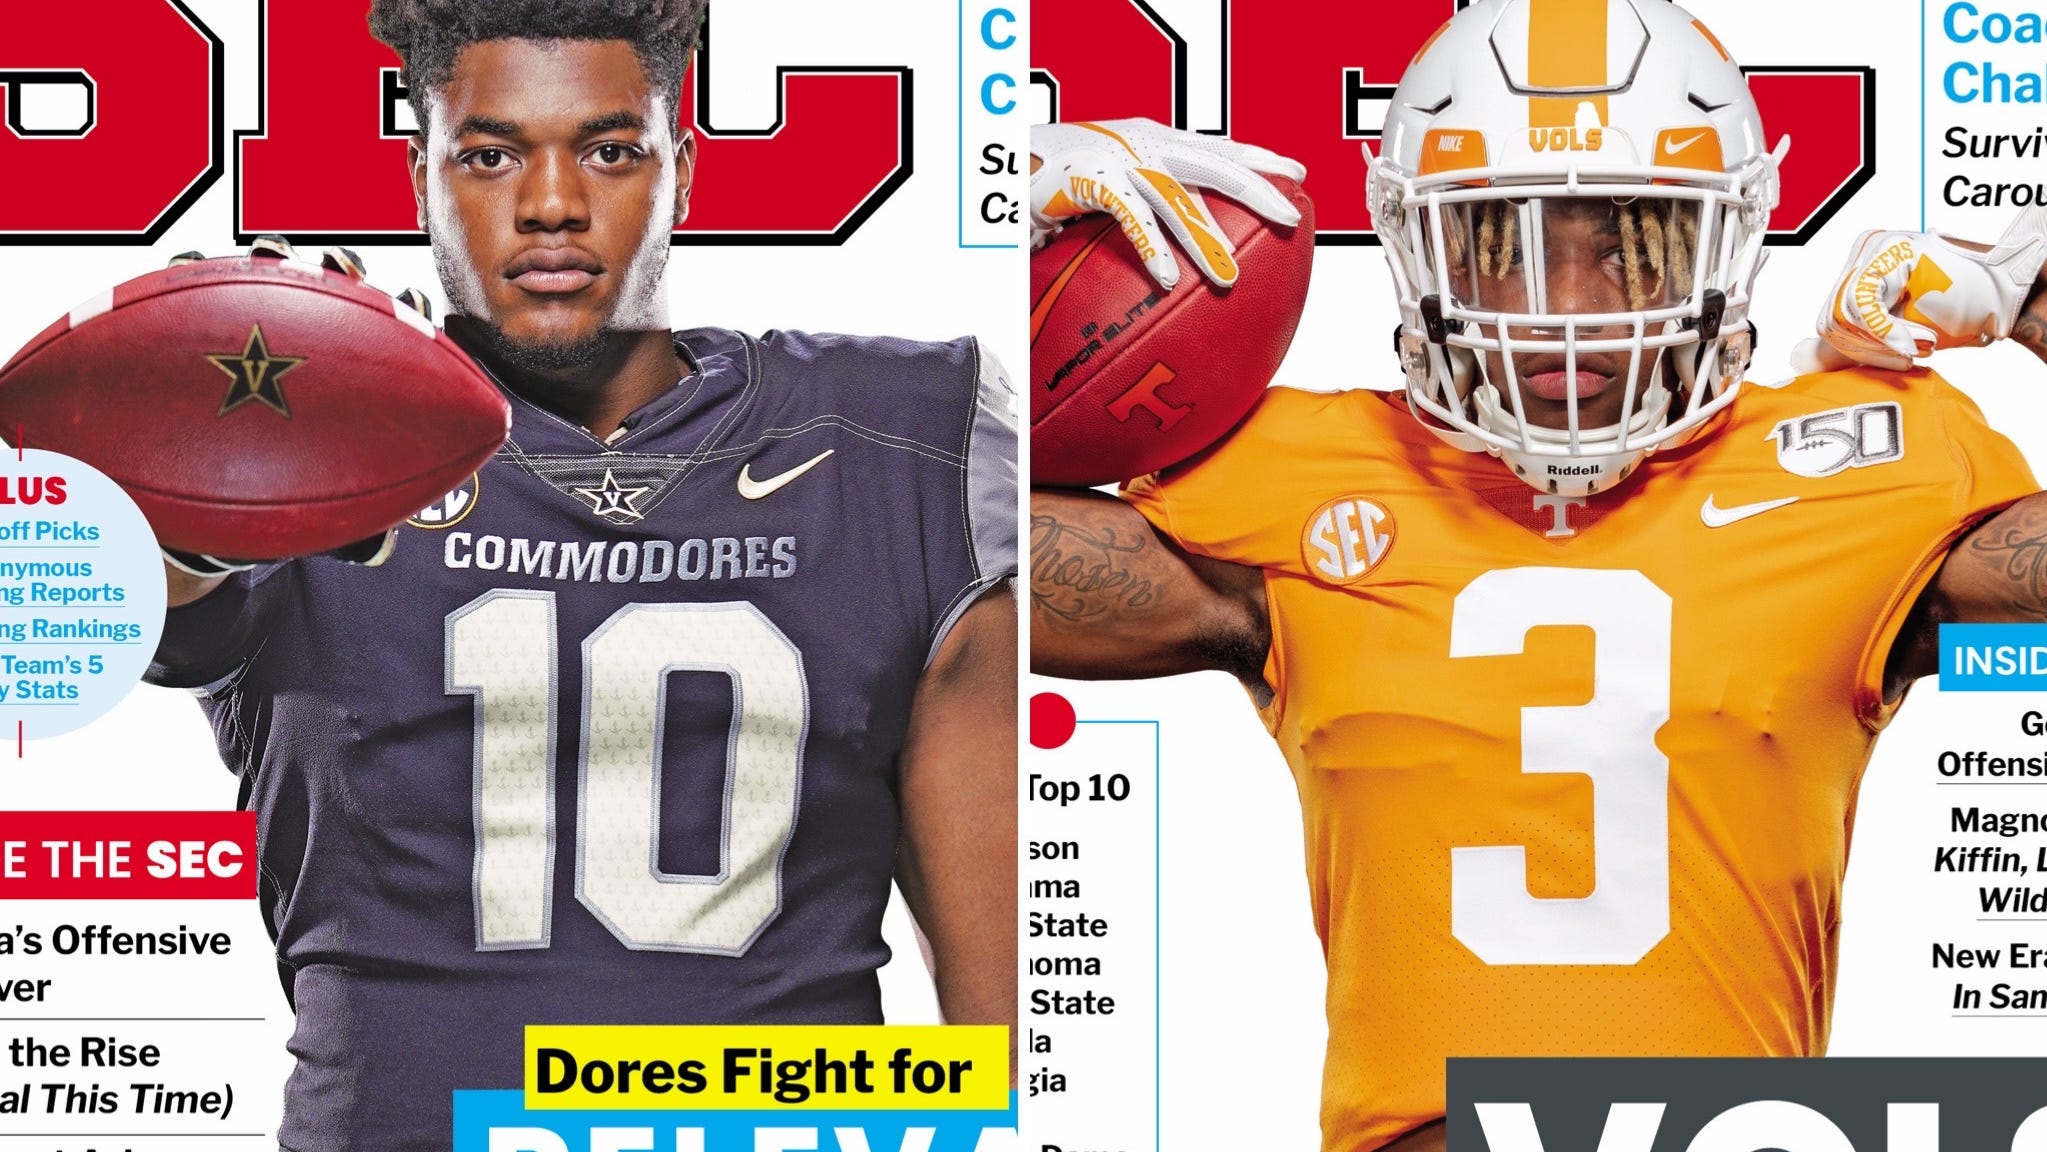 Athlon college football preview magazine to publish with season in limbo